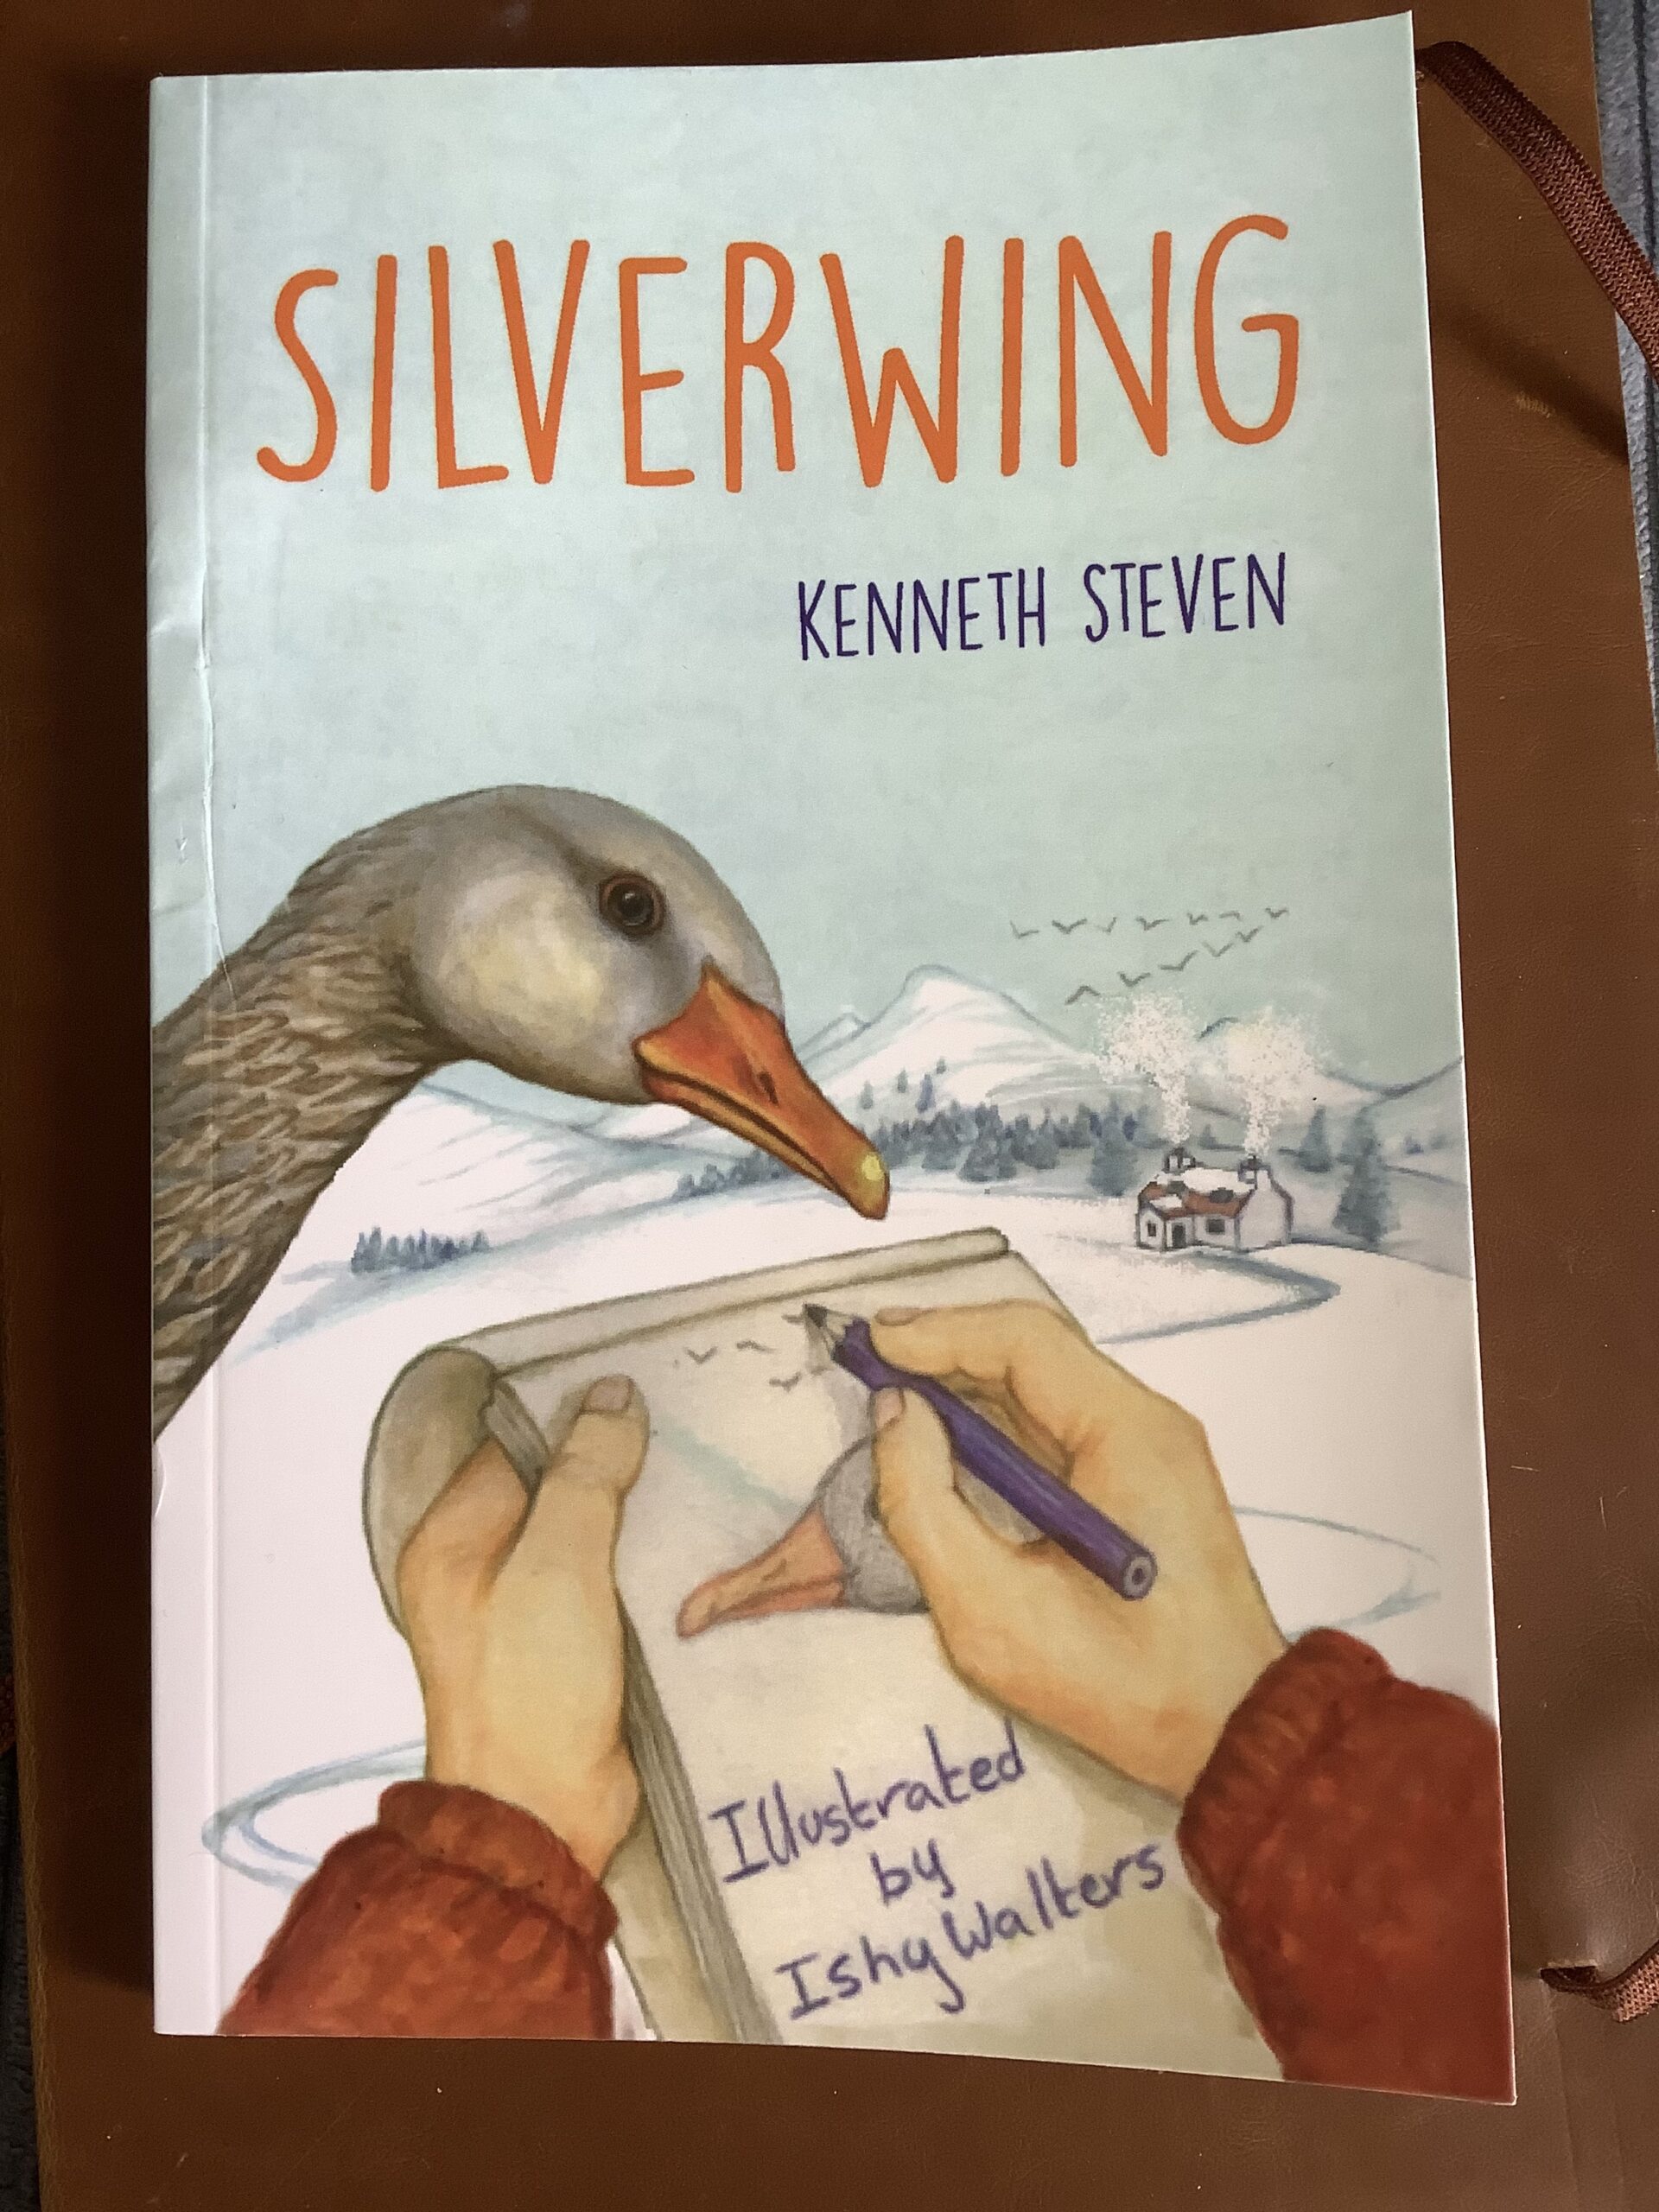 Kenneth Steven talks about his new book SILVERWING